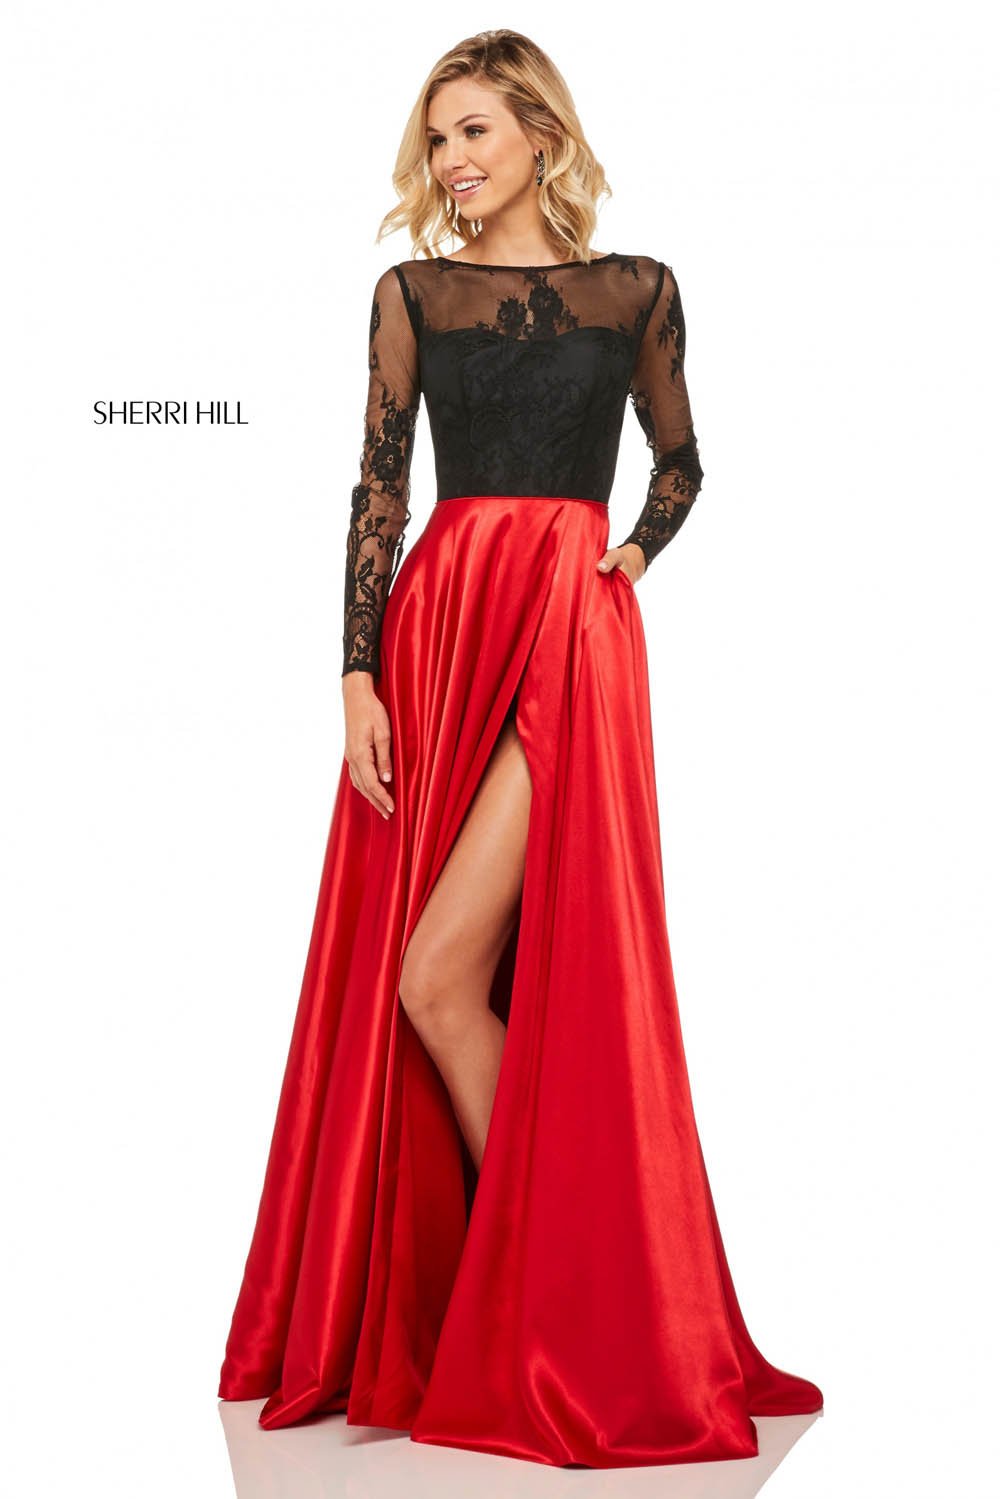 Sherri Hill 52765 dress images in these colors: Black Red, Red, Black, Wine, Navy.